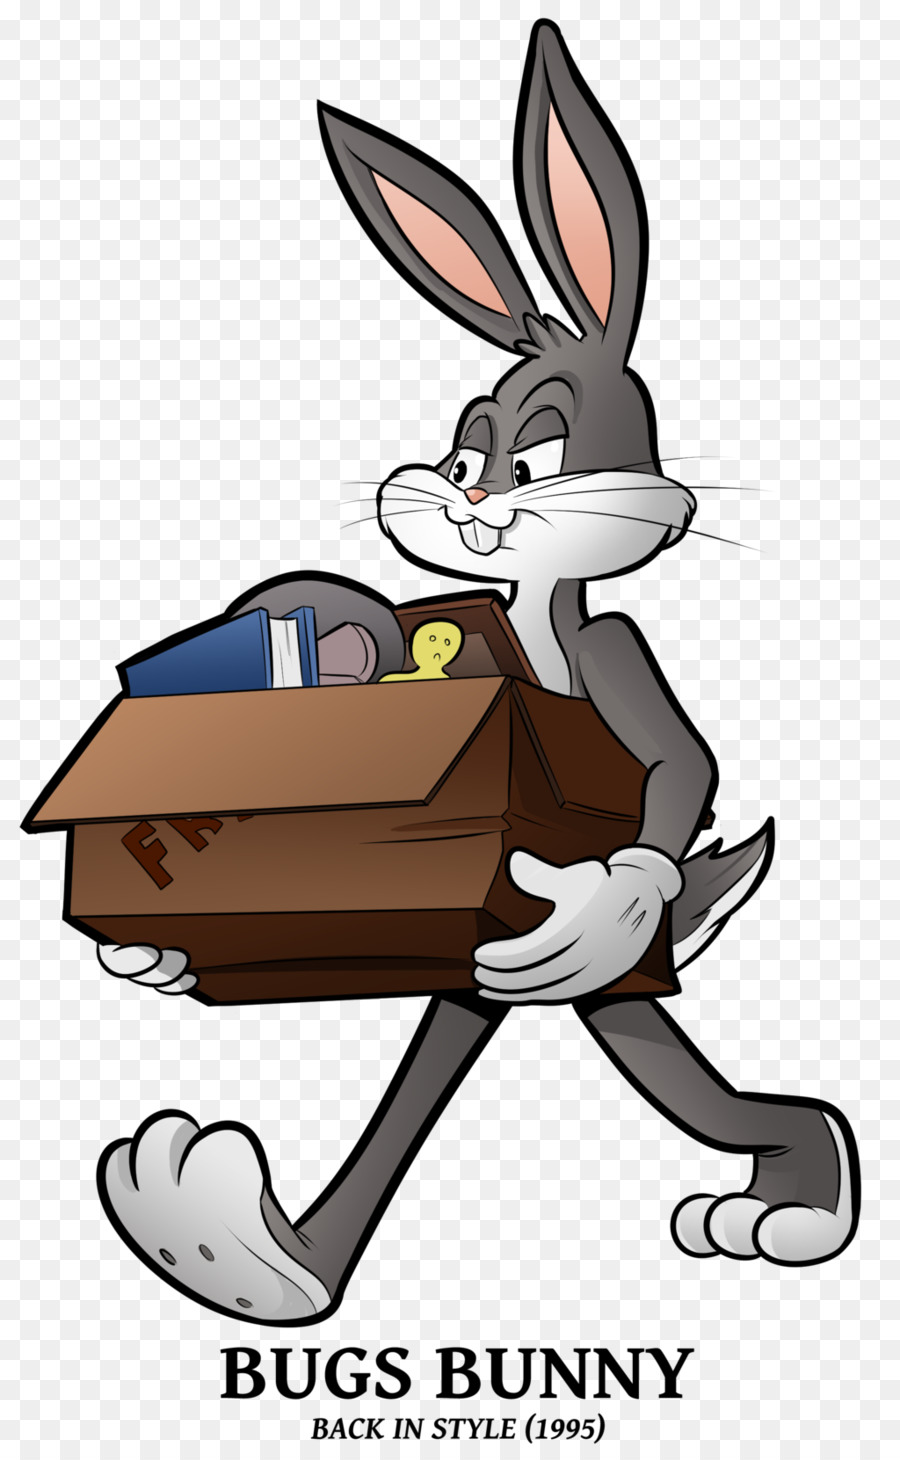 Bugs Bunny Daffy Duck Yosemite Sam Hare Cartoon - Bugs Bunny png download - 1024*1654 - Free Transparent Bugs Bunny png Download.